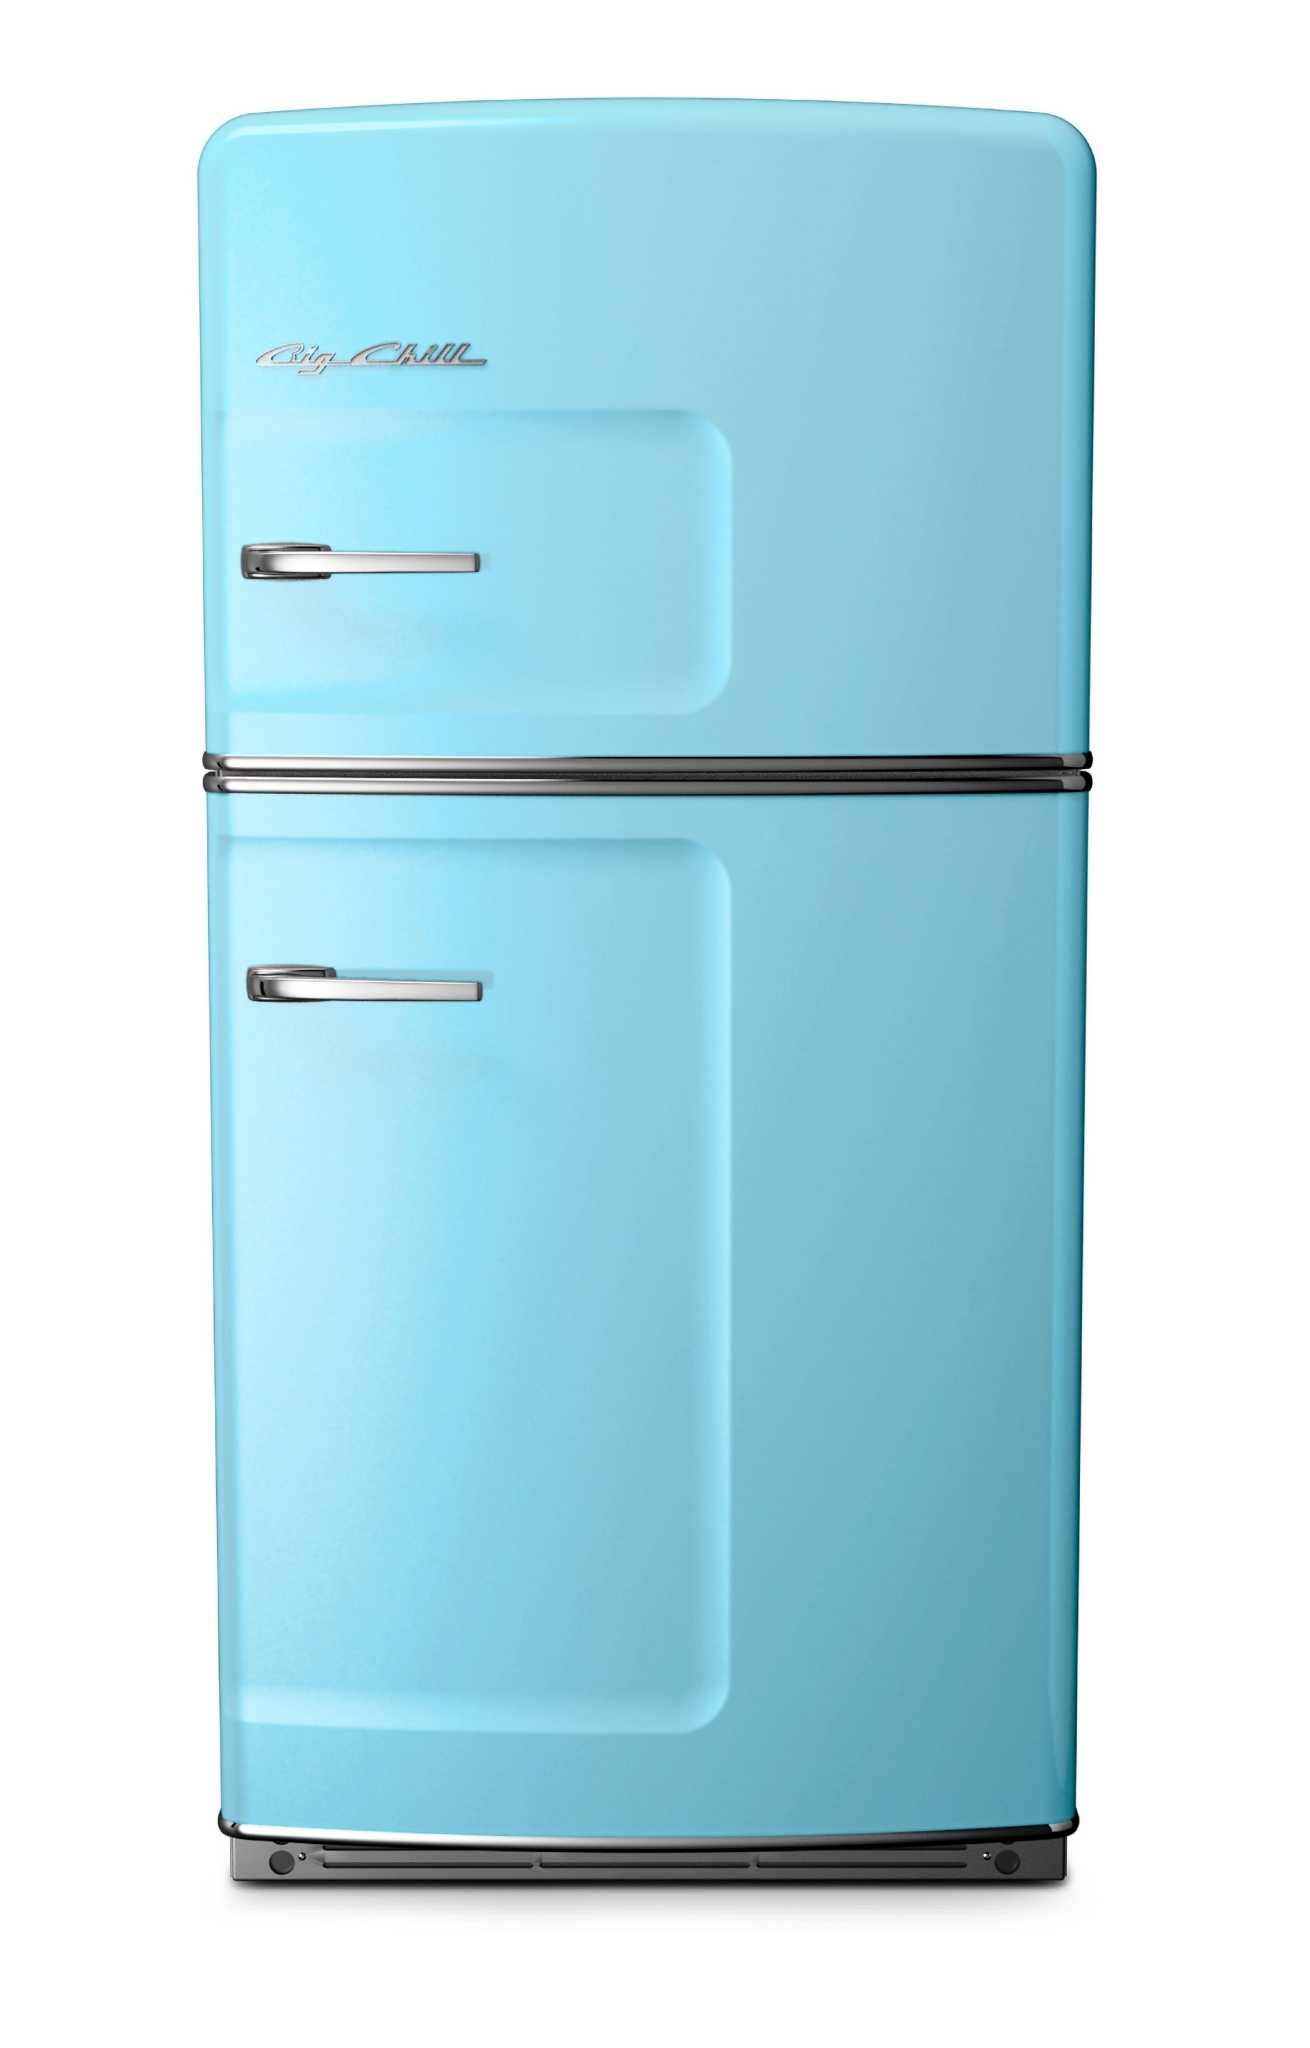 Big Chill Appliances in the Color Cobalt Blue